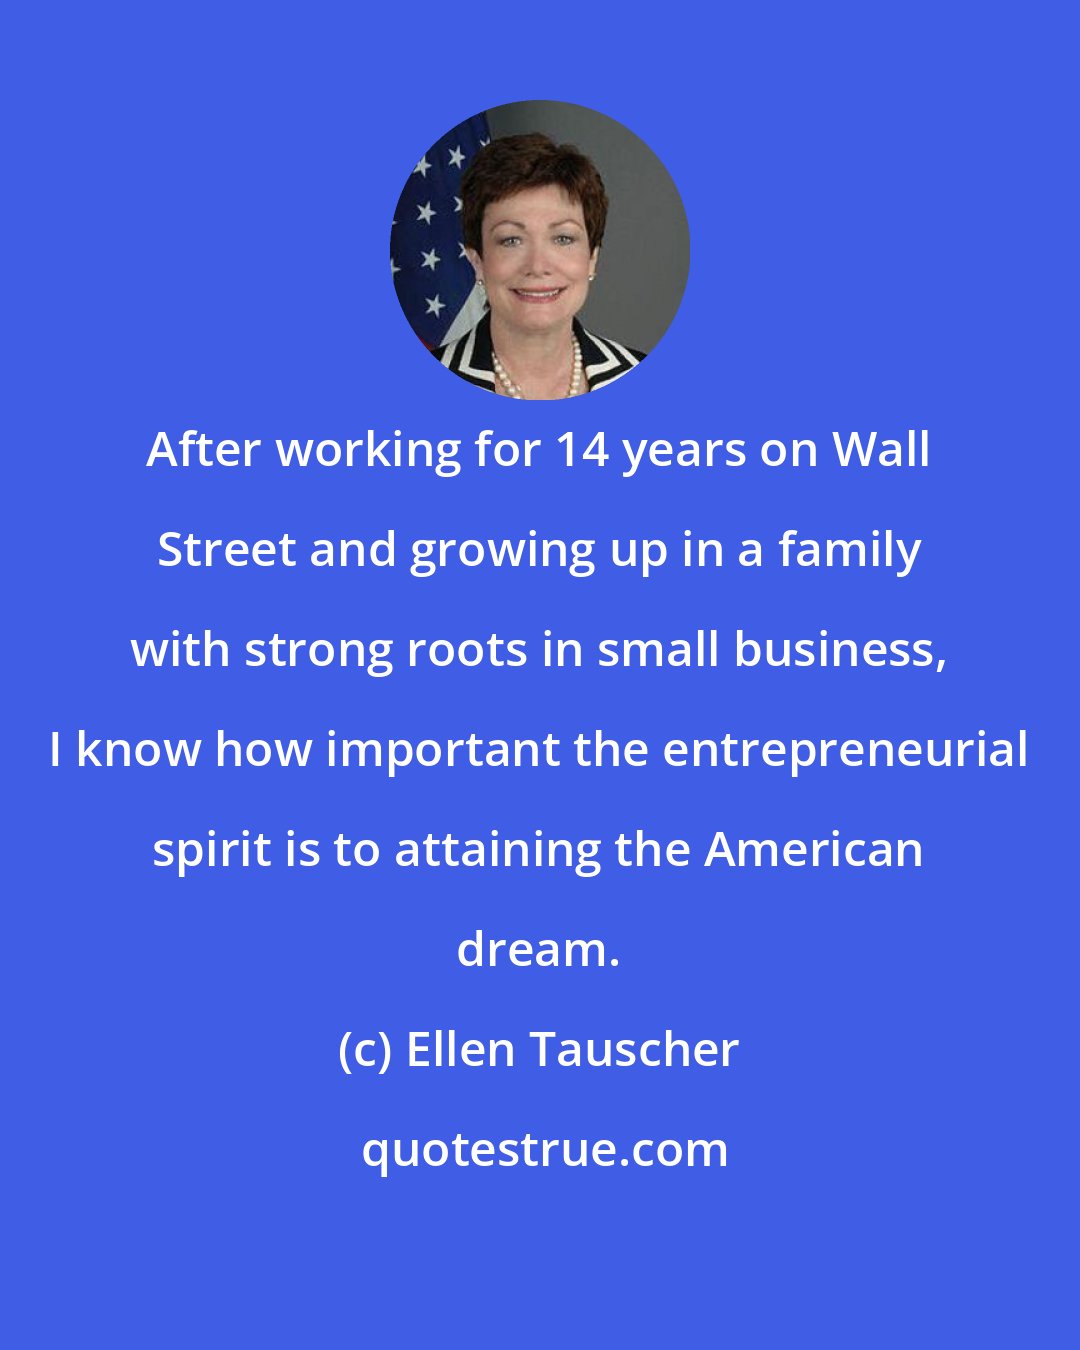 Ellen Tauscher: After working for 14 years on Wall Street and growing up in a family with strong roots in small business, I know how important the entrepreneurial spirit is to attaining the American dream.